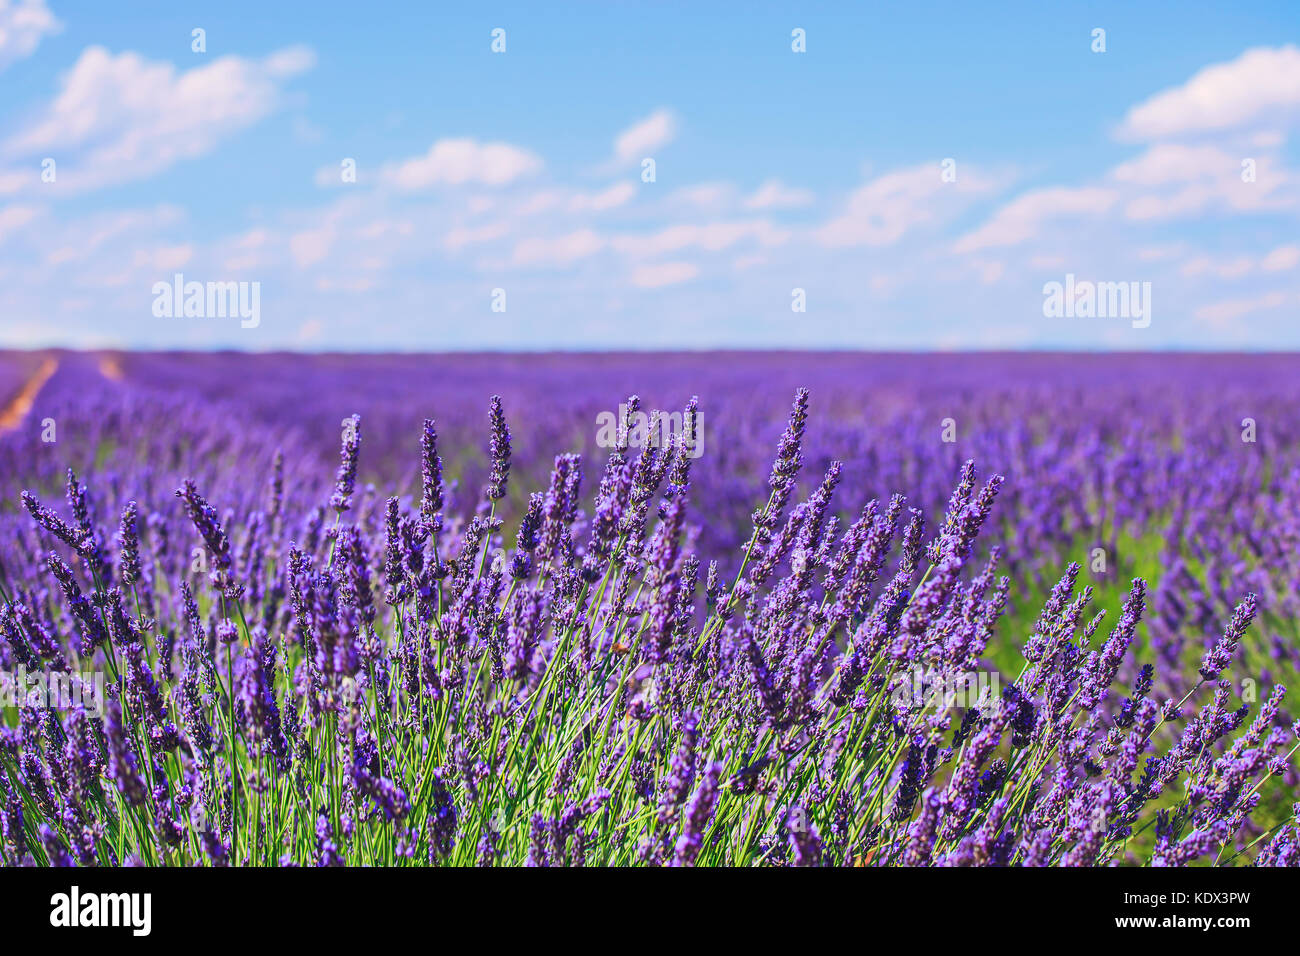 Lavender flower blooming scented fields in endless rows and a blue cloud sky. Landscape in Valensole plateau, Provence, France, Europe. Stock Photo